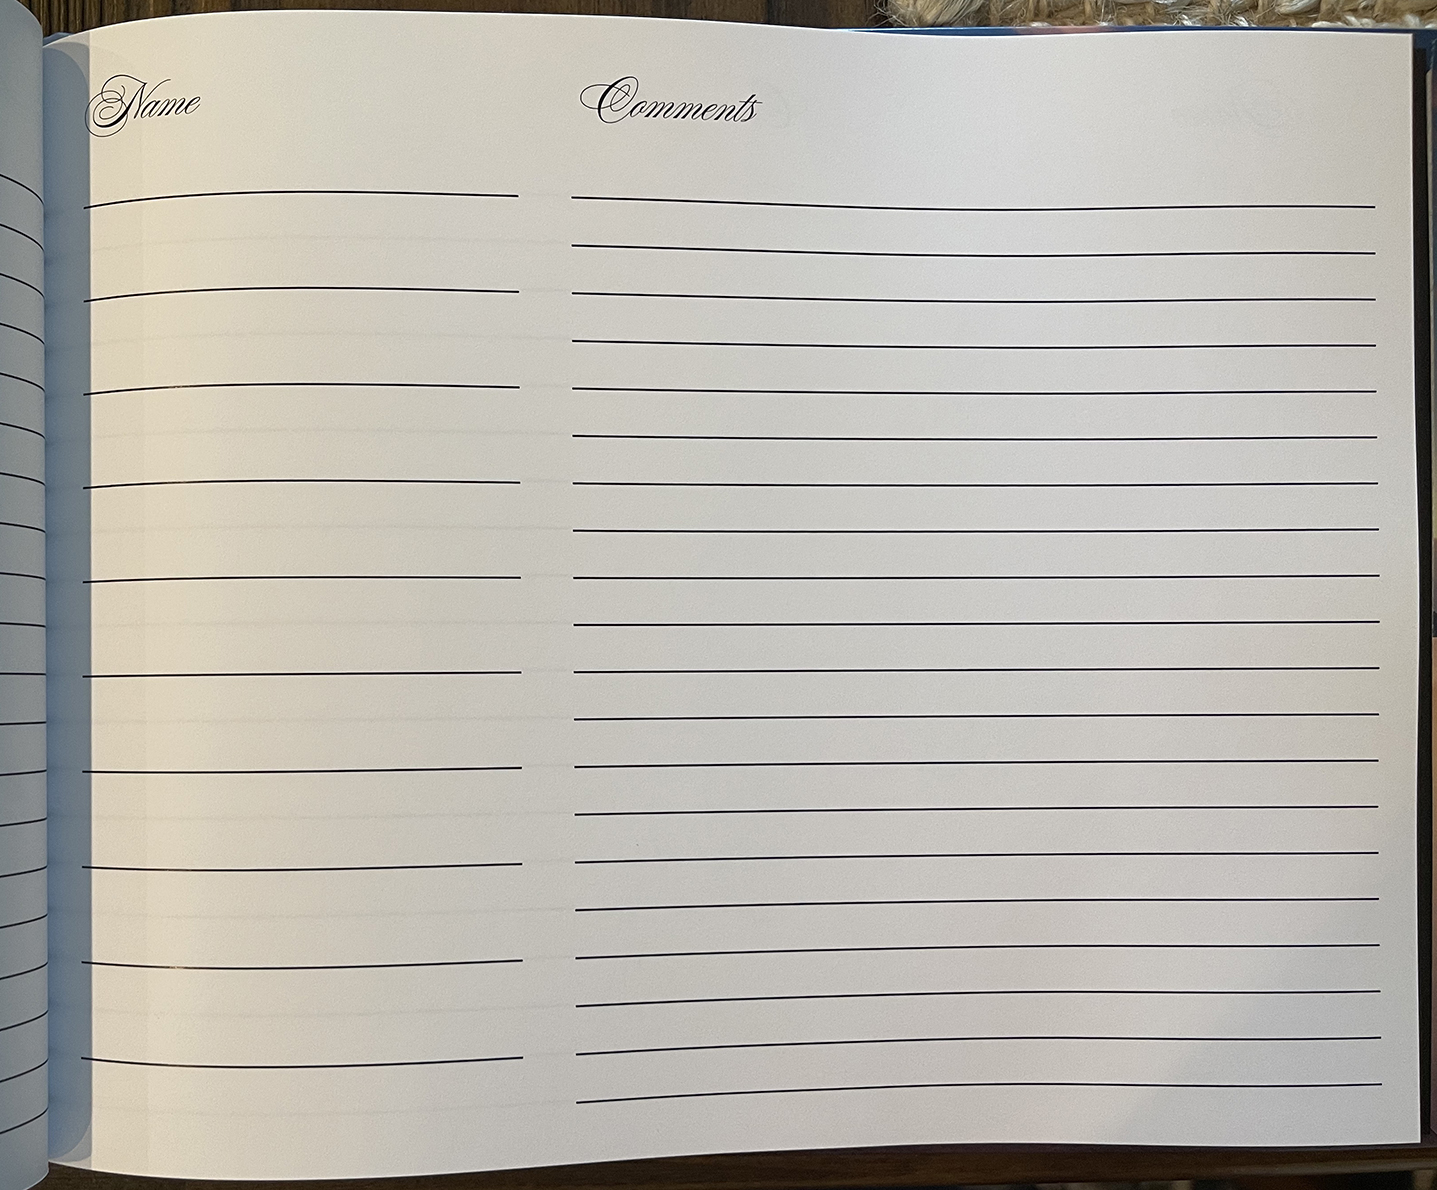 Do I Need a Guestbook For a Funeral? - Funeral Planning